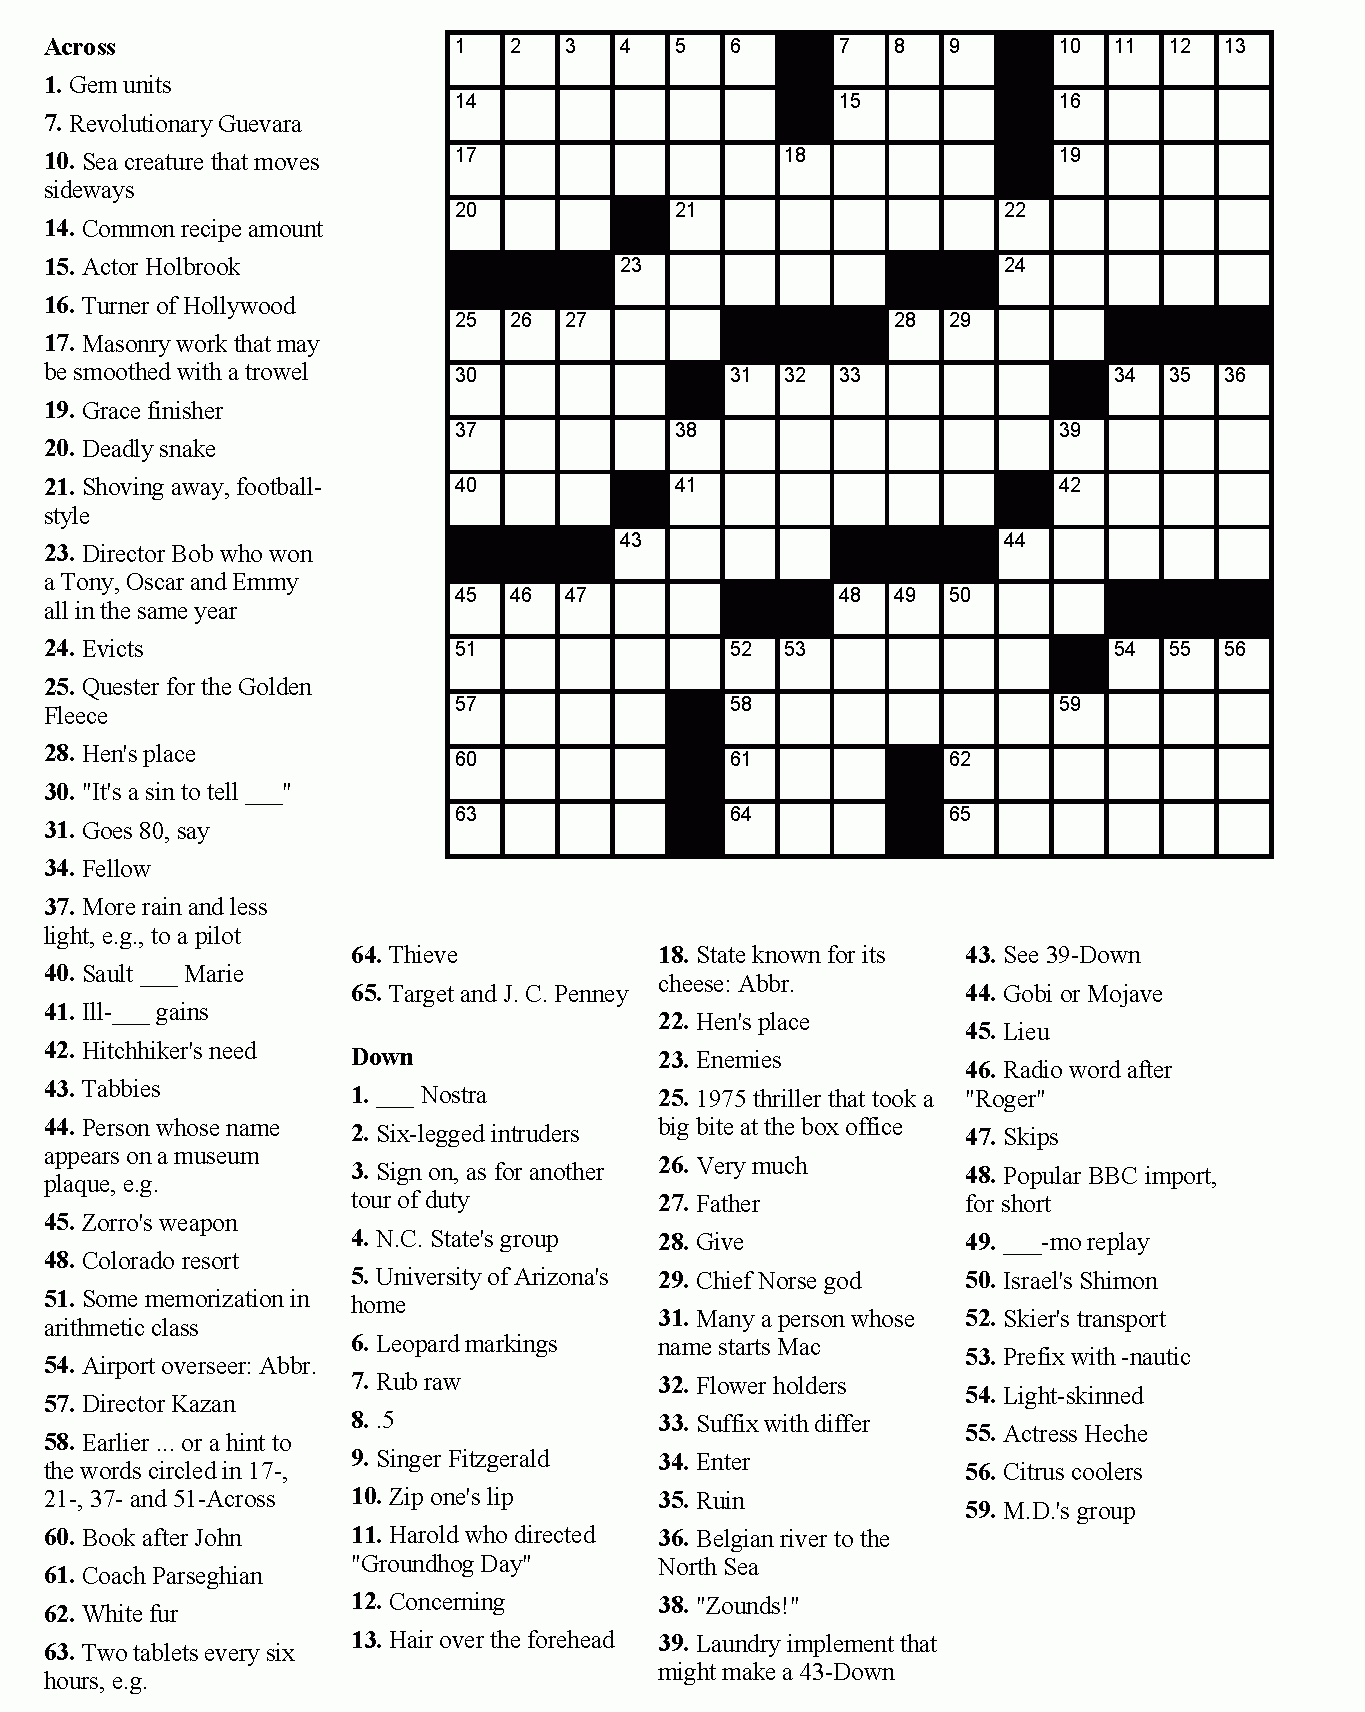 Free Printable Crossword Puzzles Easy For Adults | My Board | Free - Easy Crossword Puzzles Free Online Printable